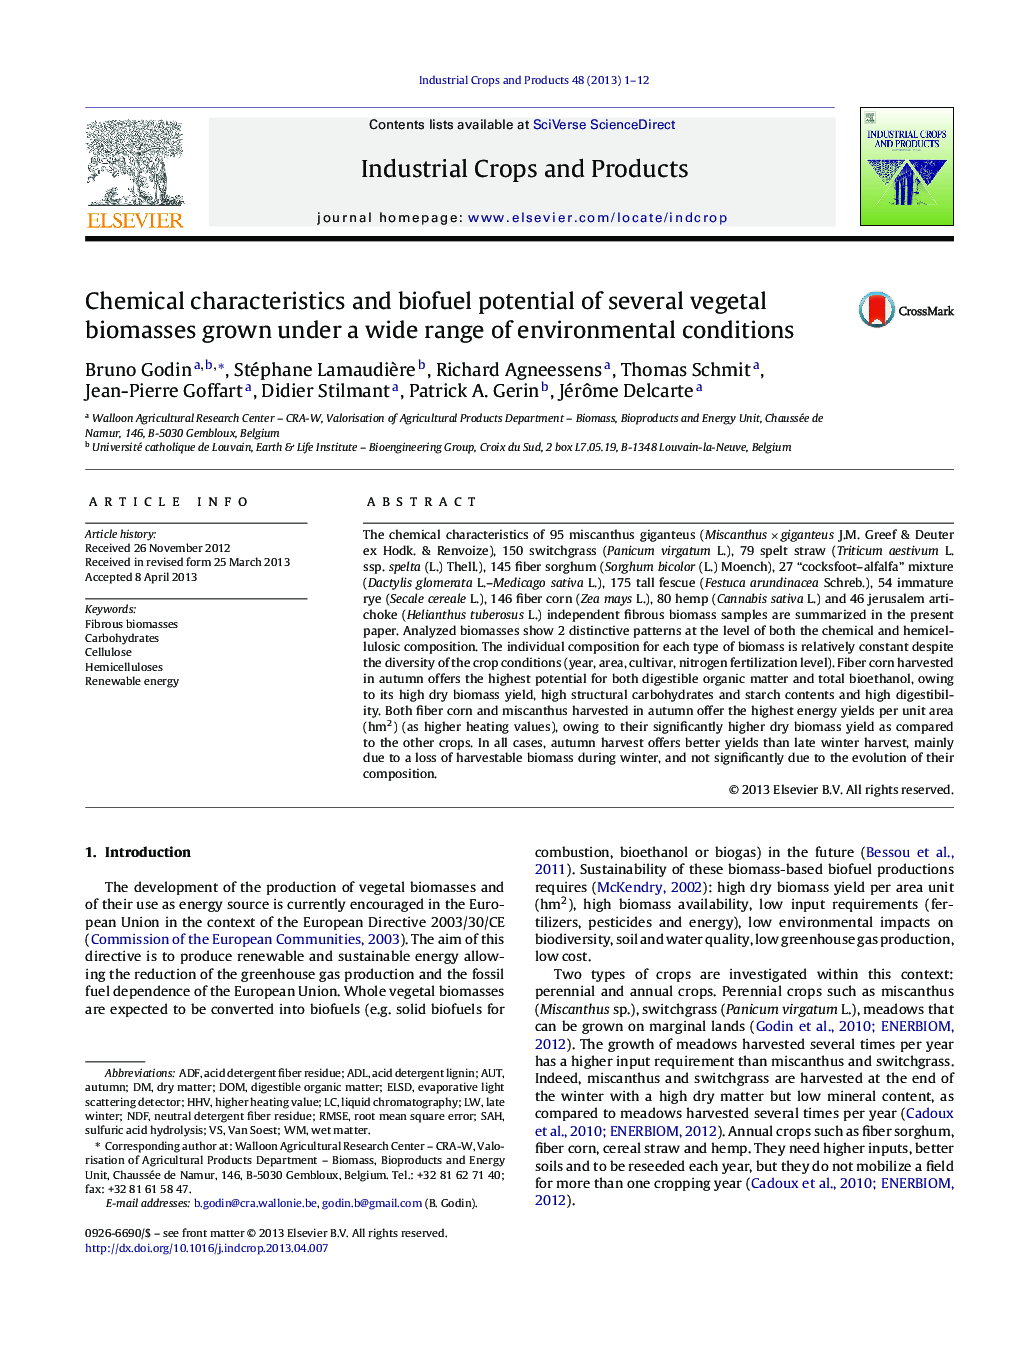 Chemical characteristics and biofuel potential of several vegetal biomasses grown under a wide range of environmental conditions